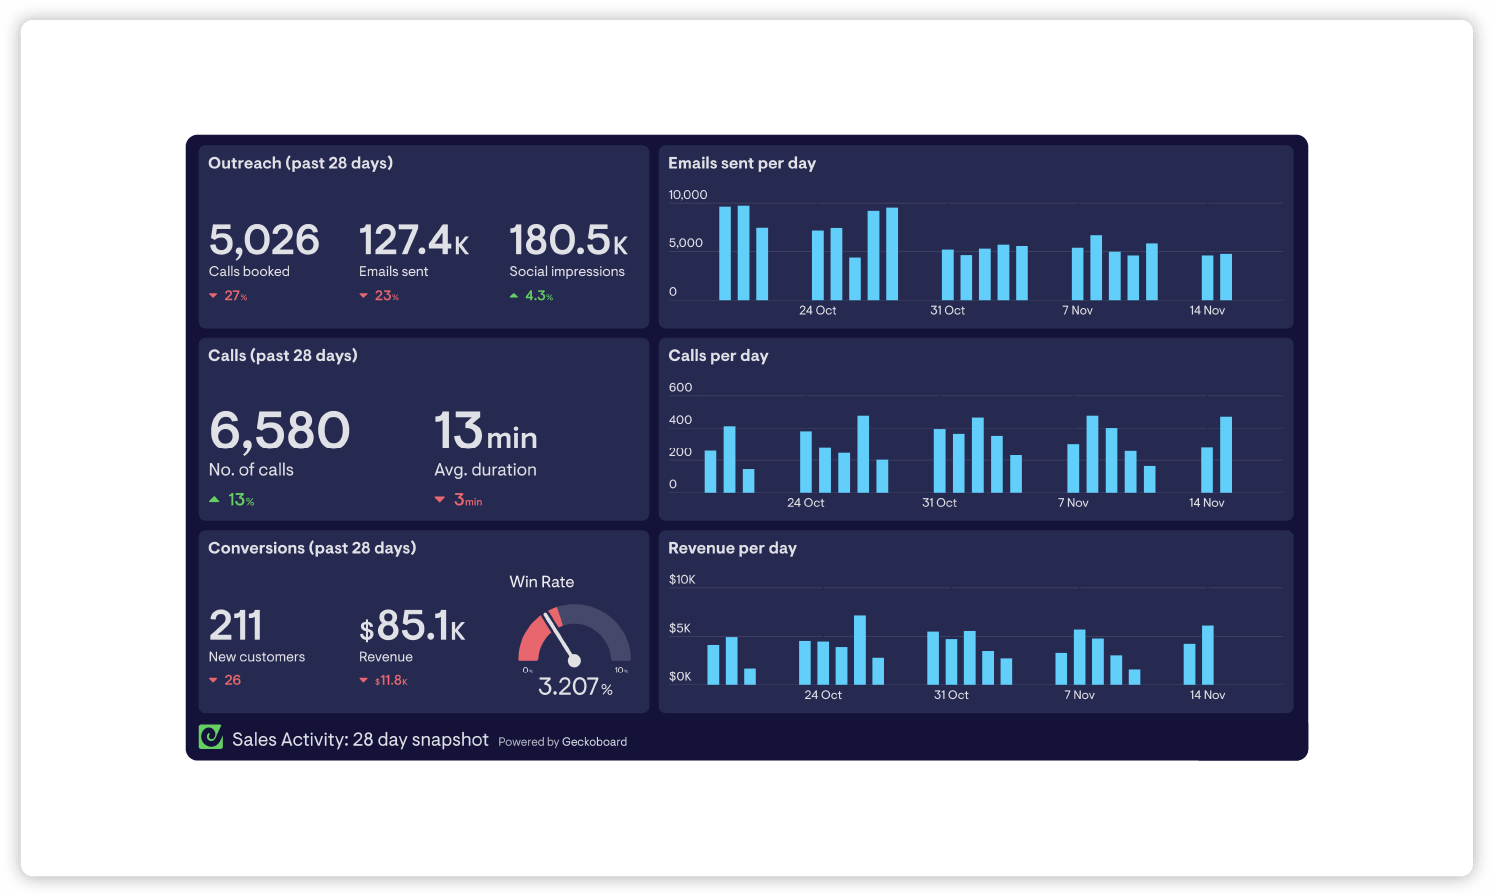 Sales activities dashboard showing all relevant data on outreach, calls, and conversions with bar graph data showing each metric per day